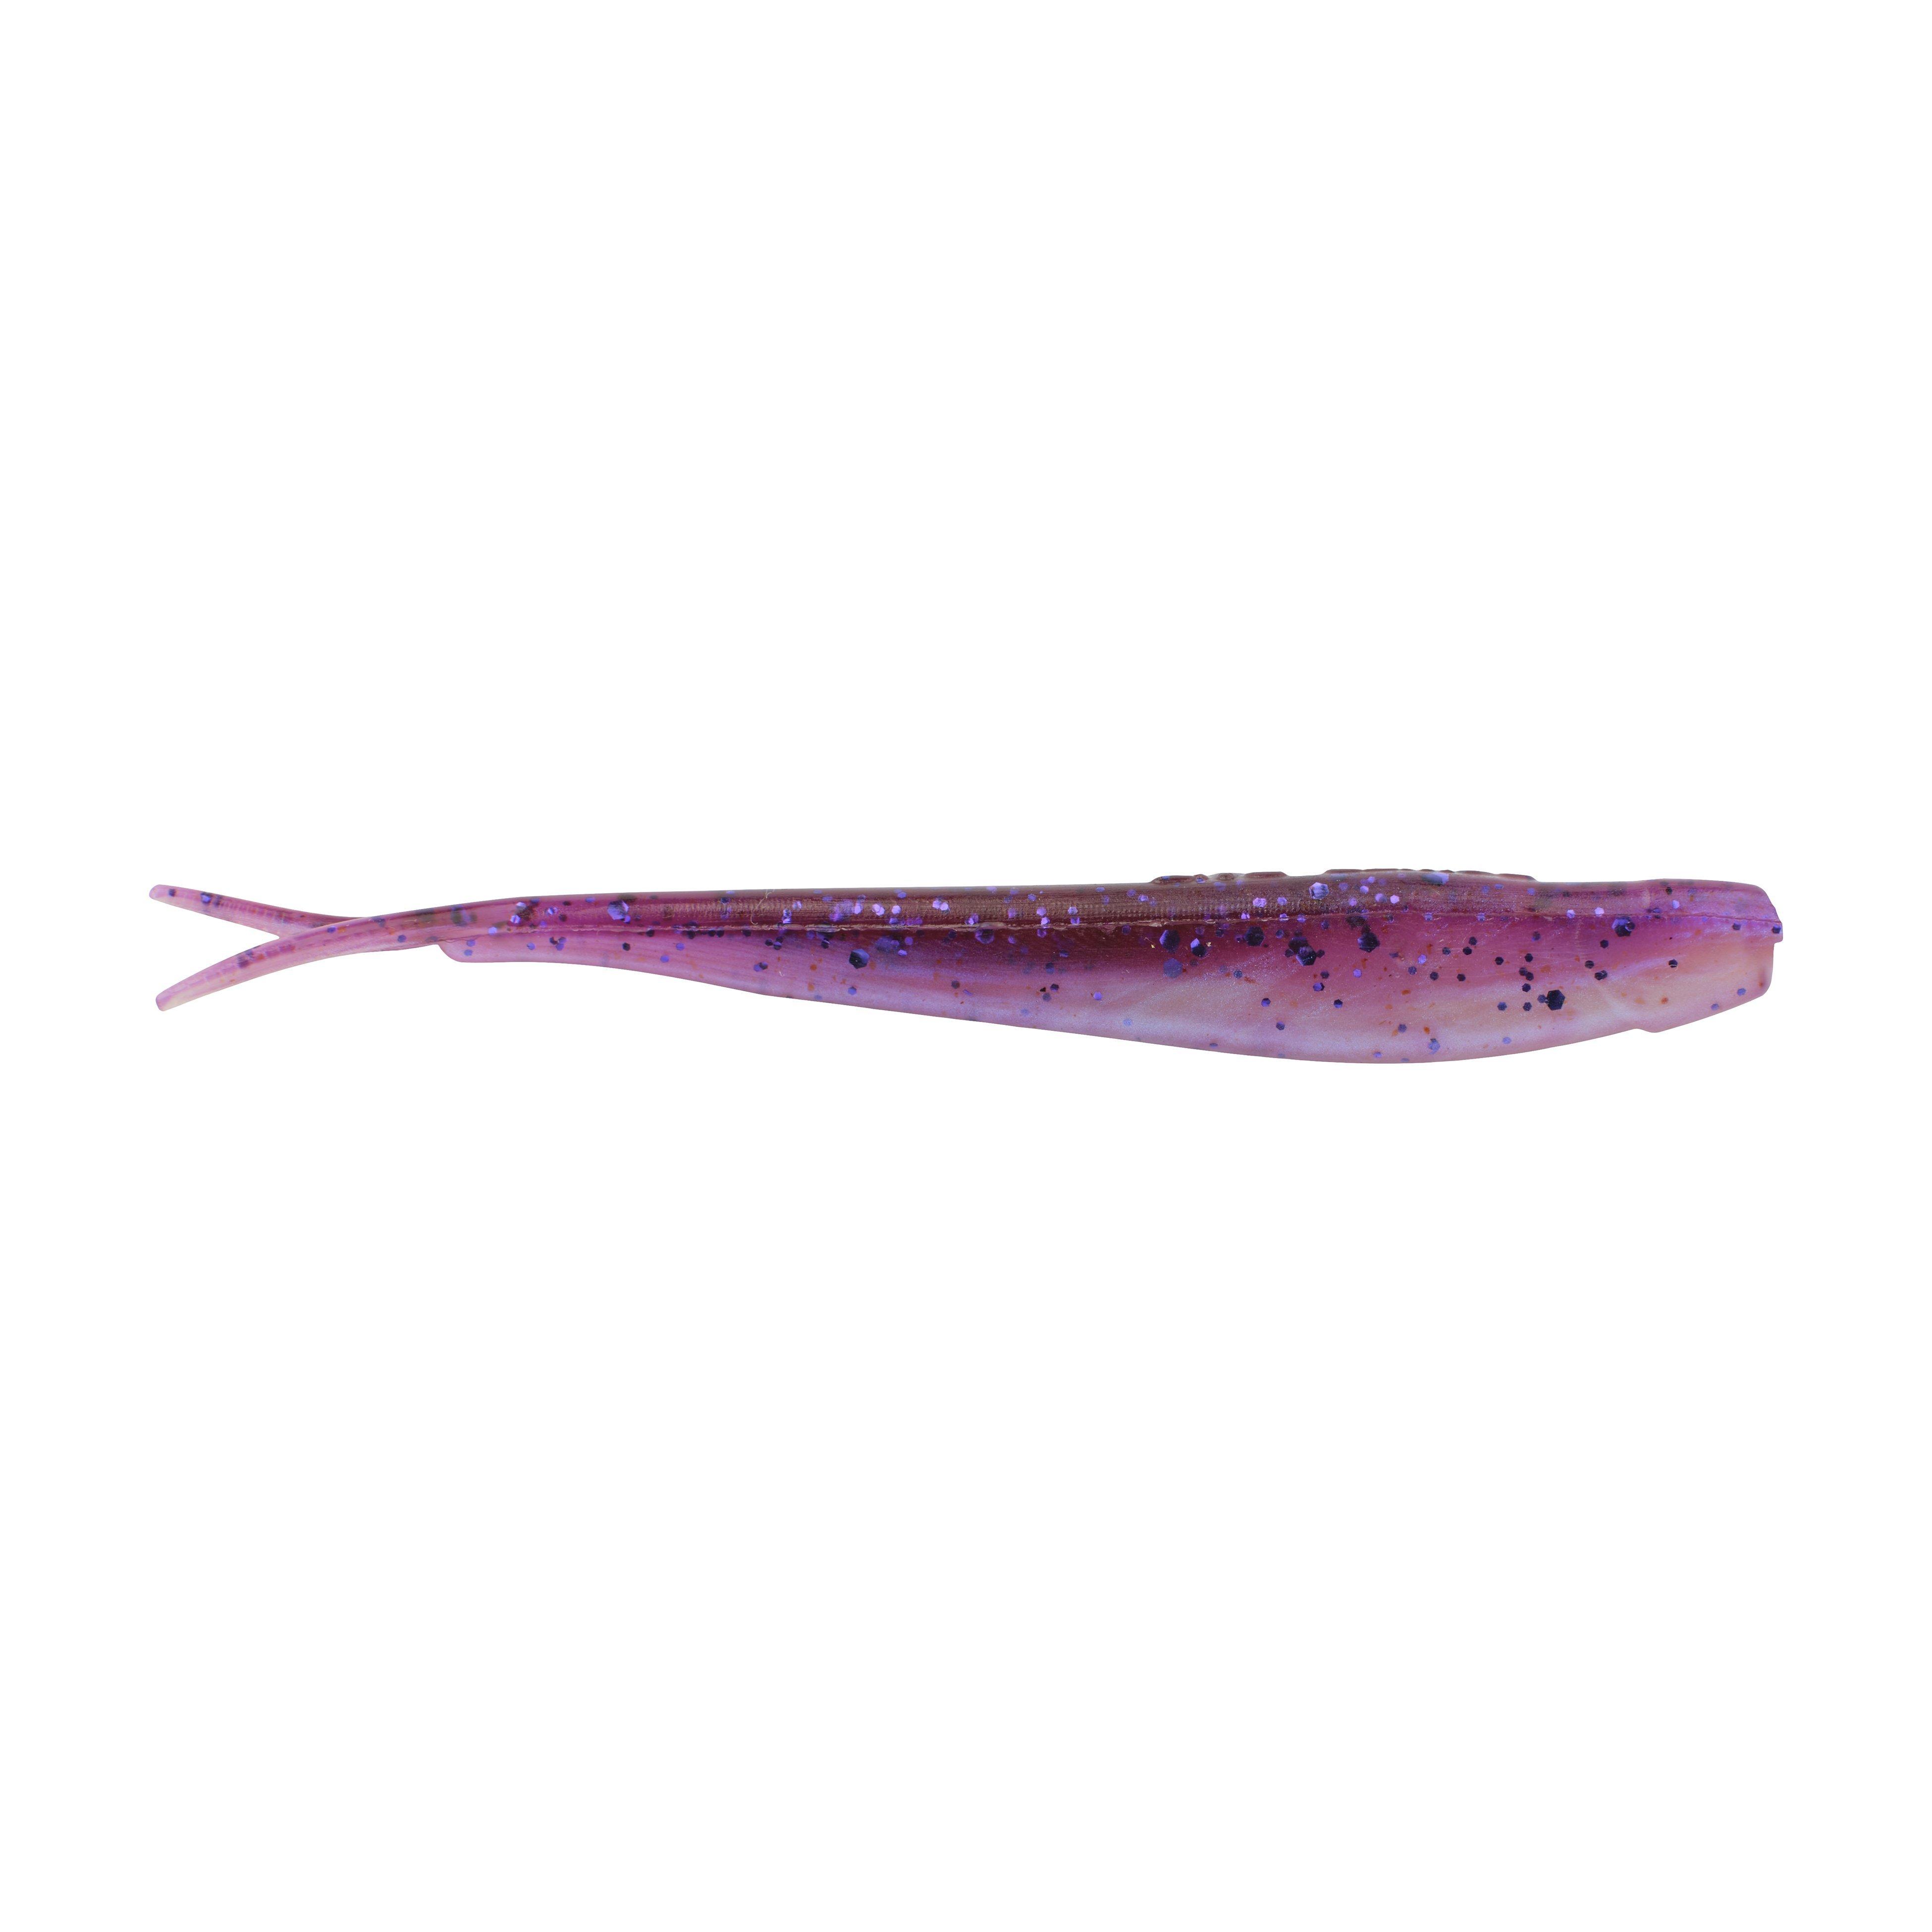 3” Split tail Minnow. Scented Crappie/walleye/bass Soft Plastic 15 Count